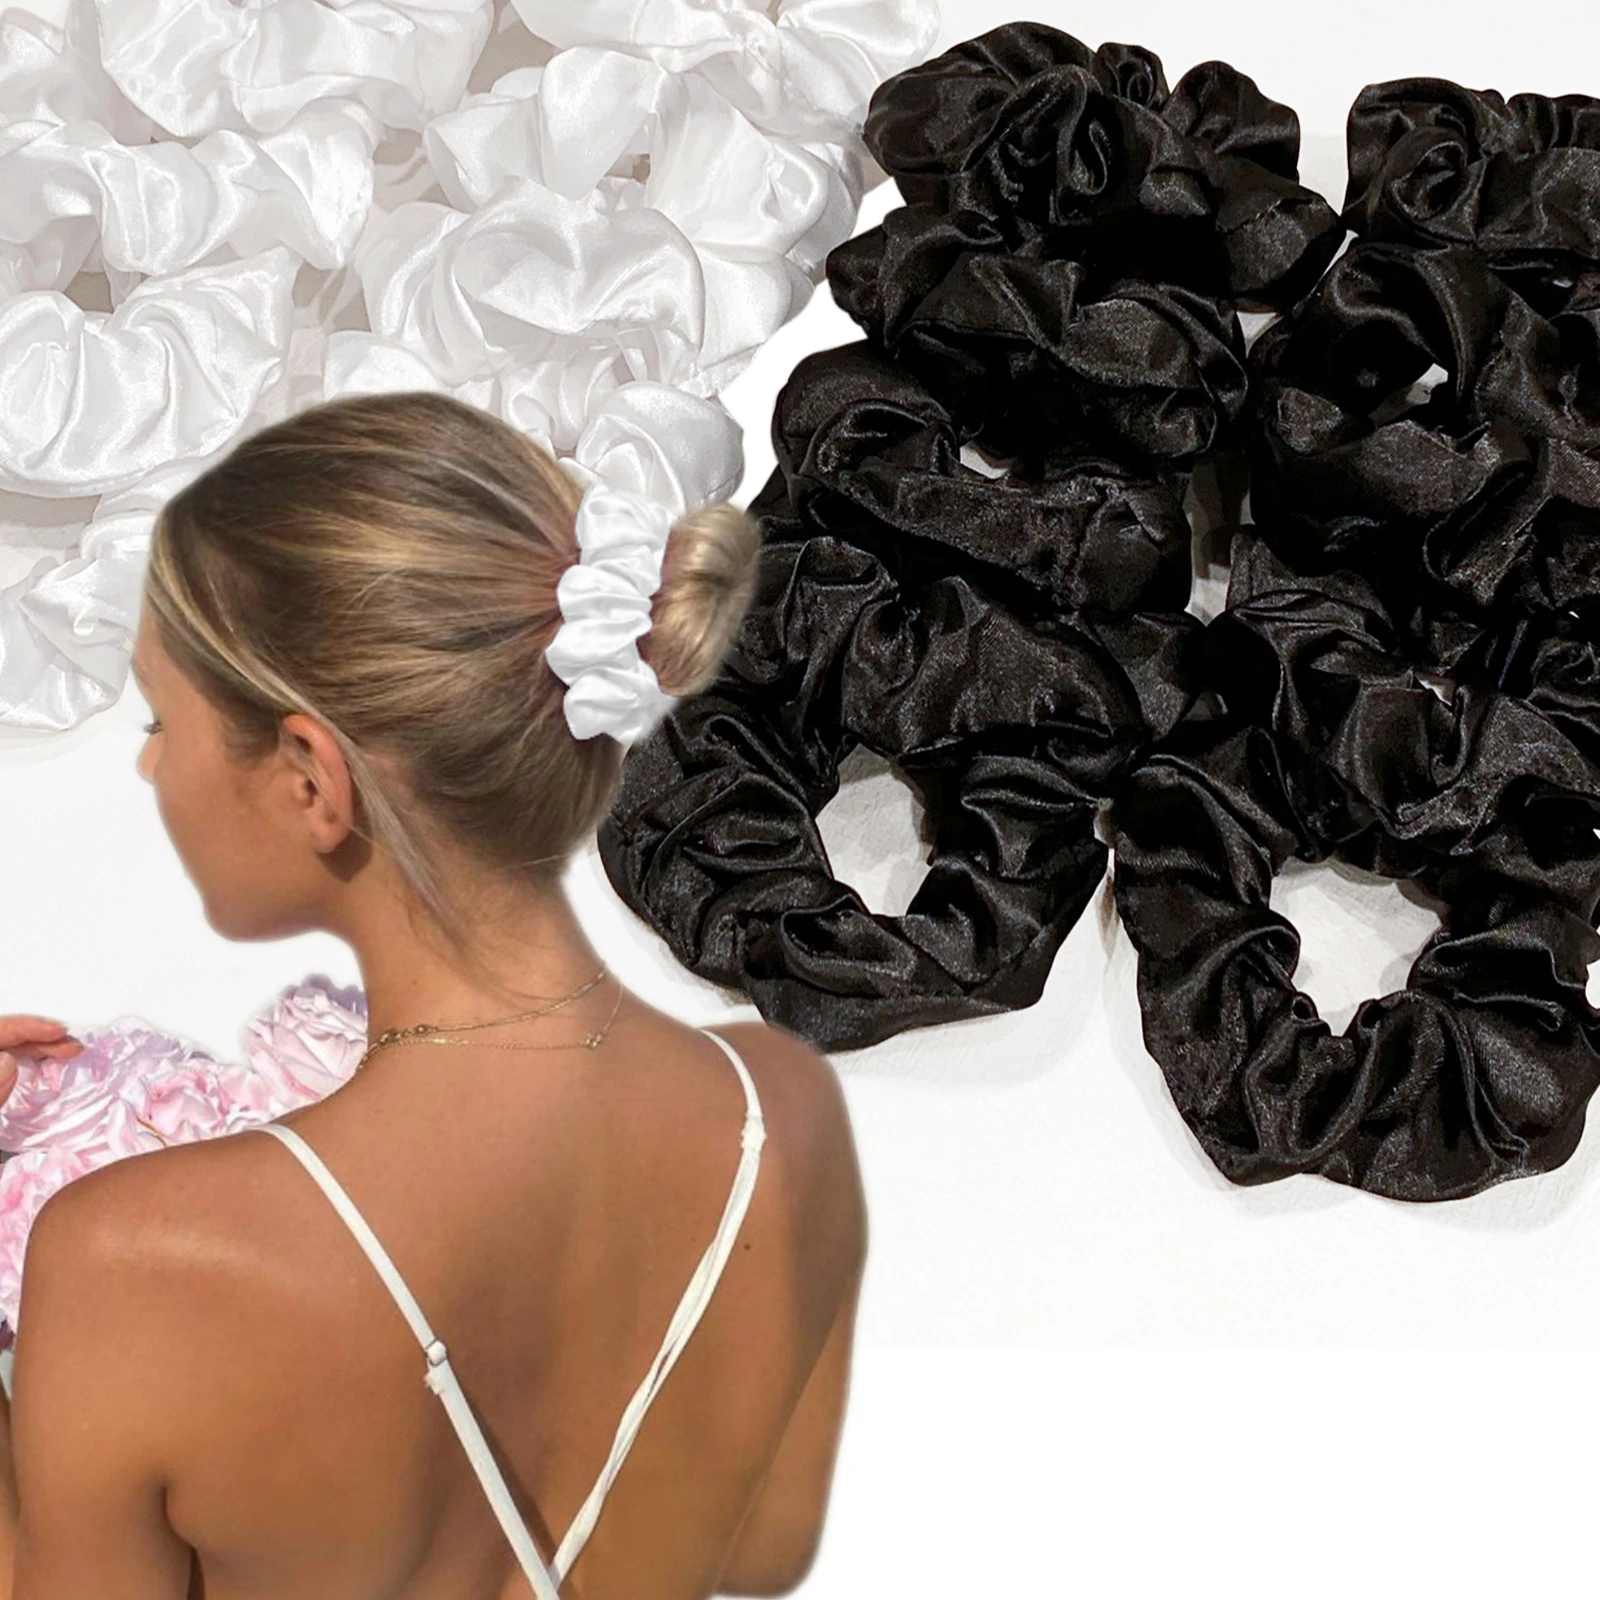 20PCS/Set Classic Black White High Quality Elastic Hair Scrunchies For Women Hair Ties Rubber Band Hair Rope Accessories headbands for women